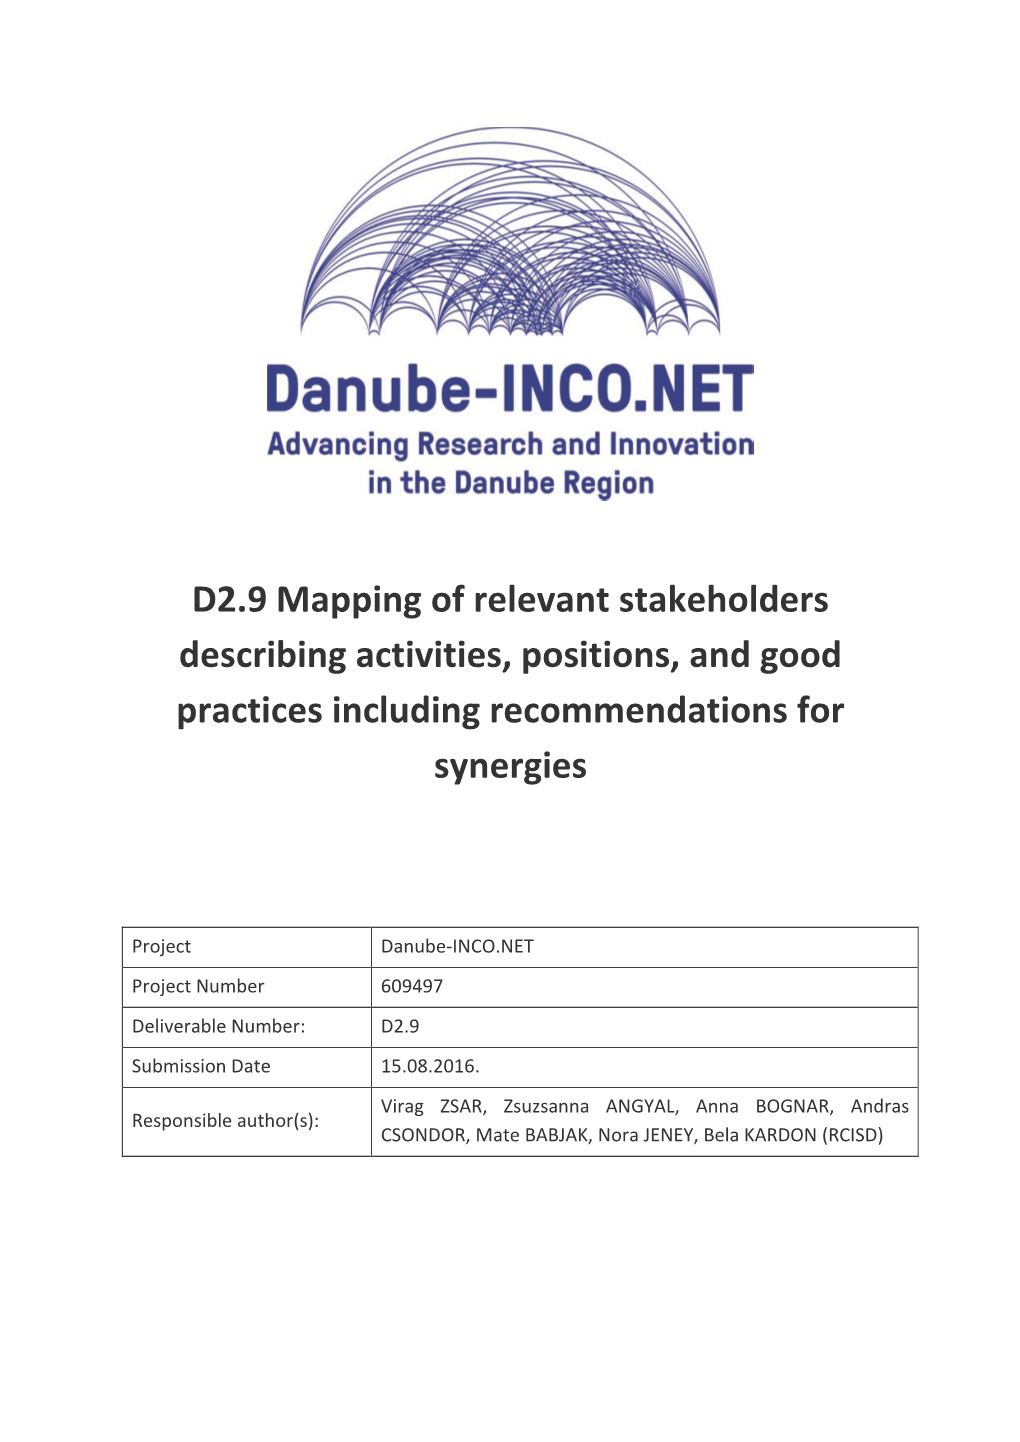 D2.9 Mapping of Relevant Stakeholders Describing Activities, Positions, and Good Practices Including Recommendations For